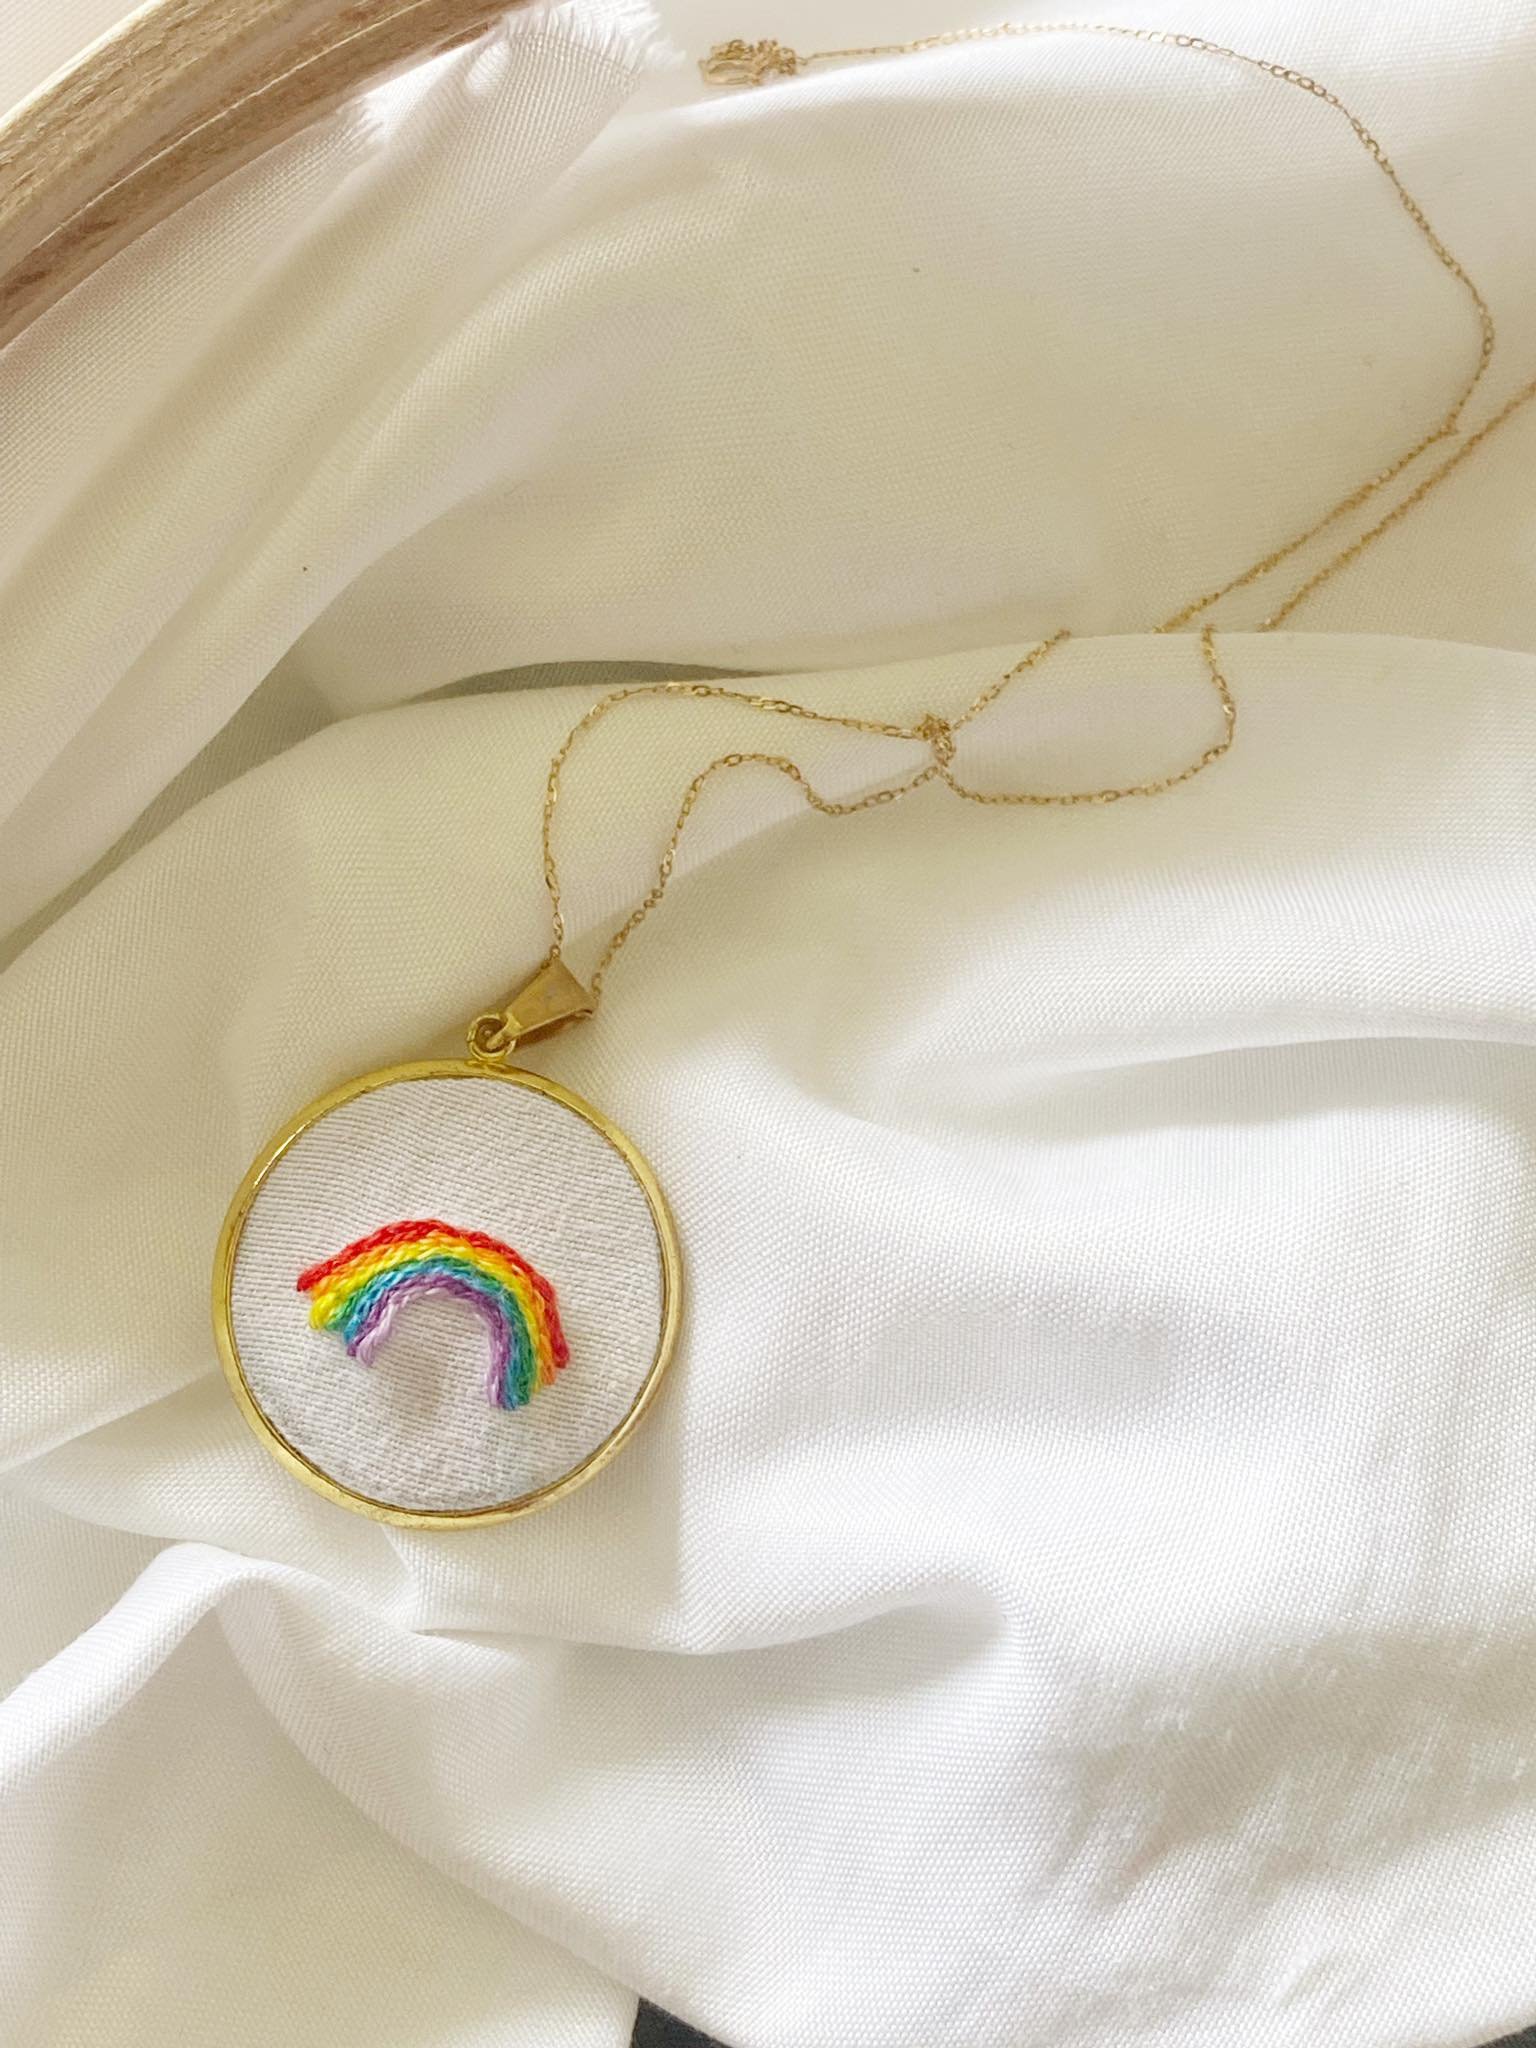 How To Make a Hand Embroidery Rainbow Necklace